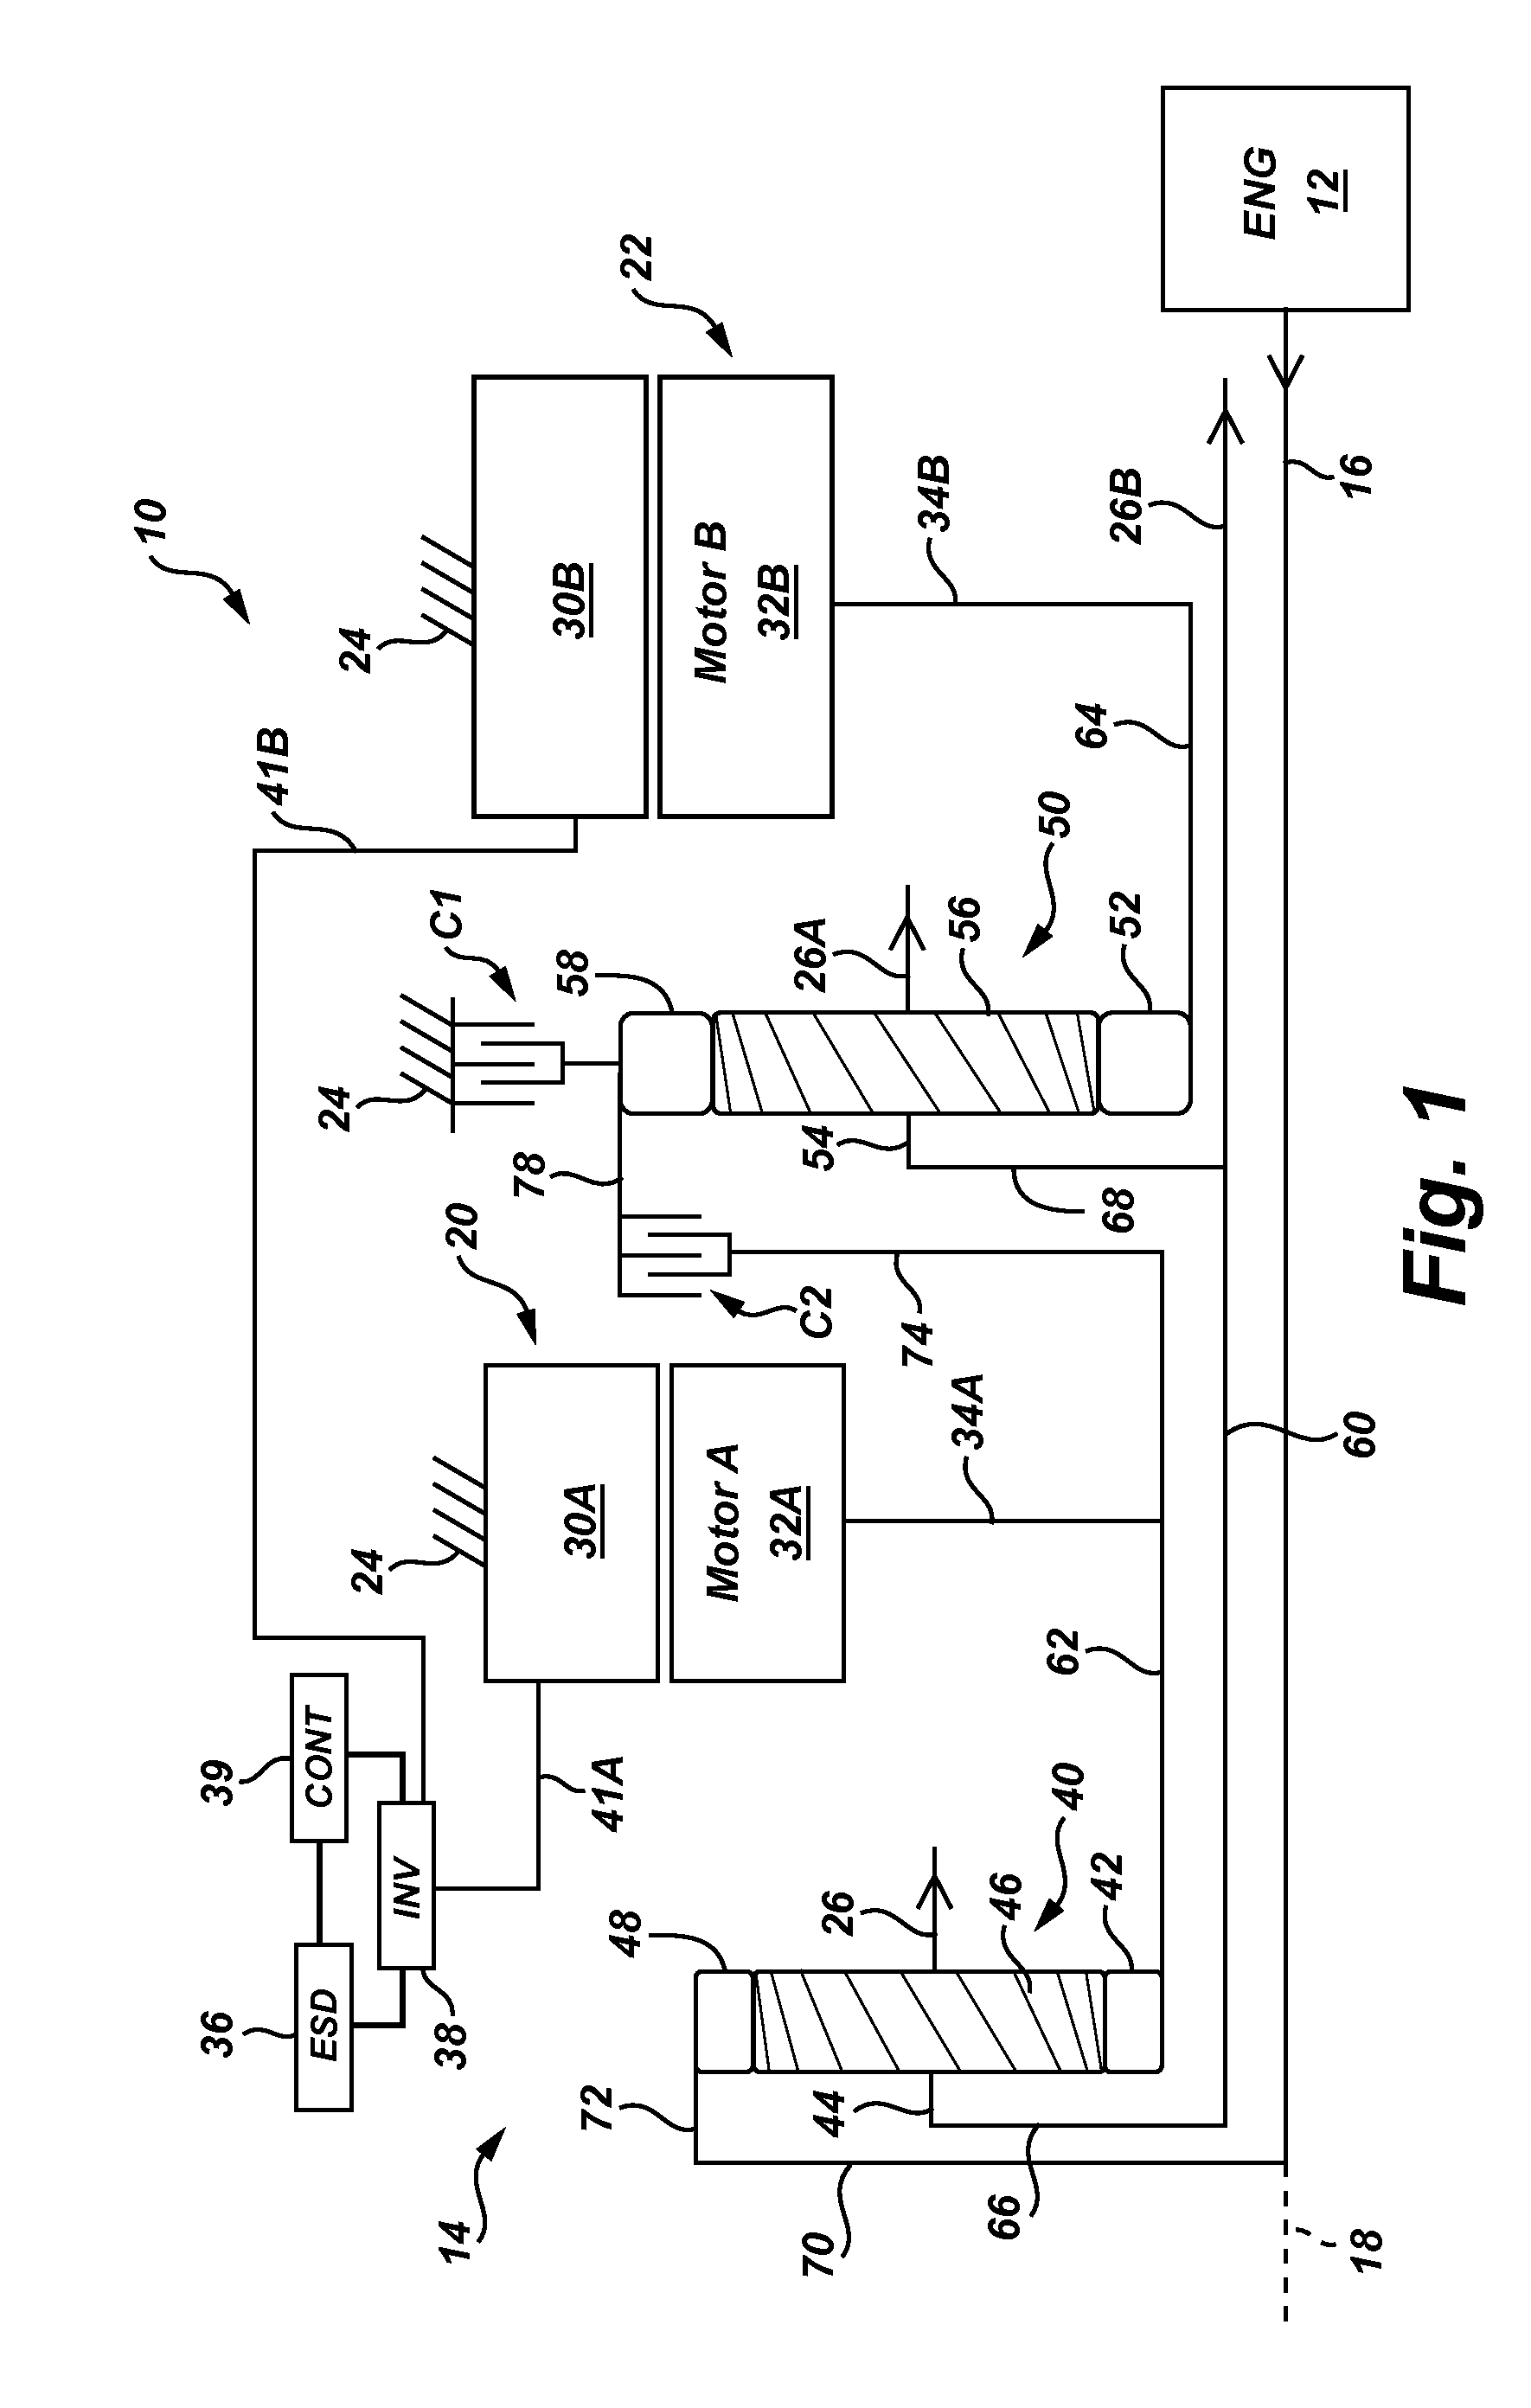 Electrically-variable transmission